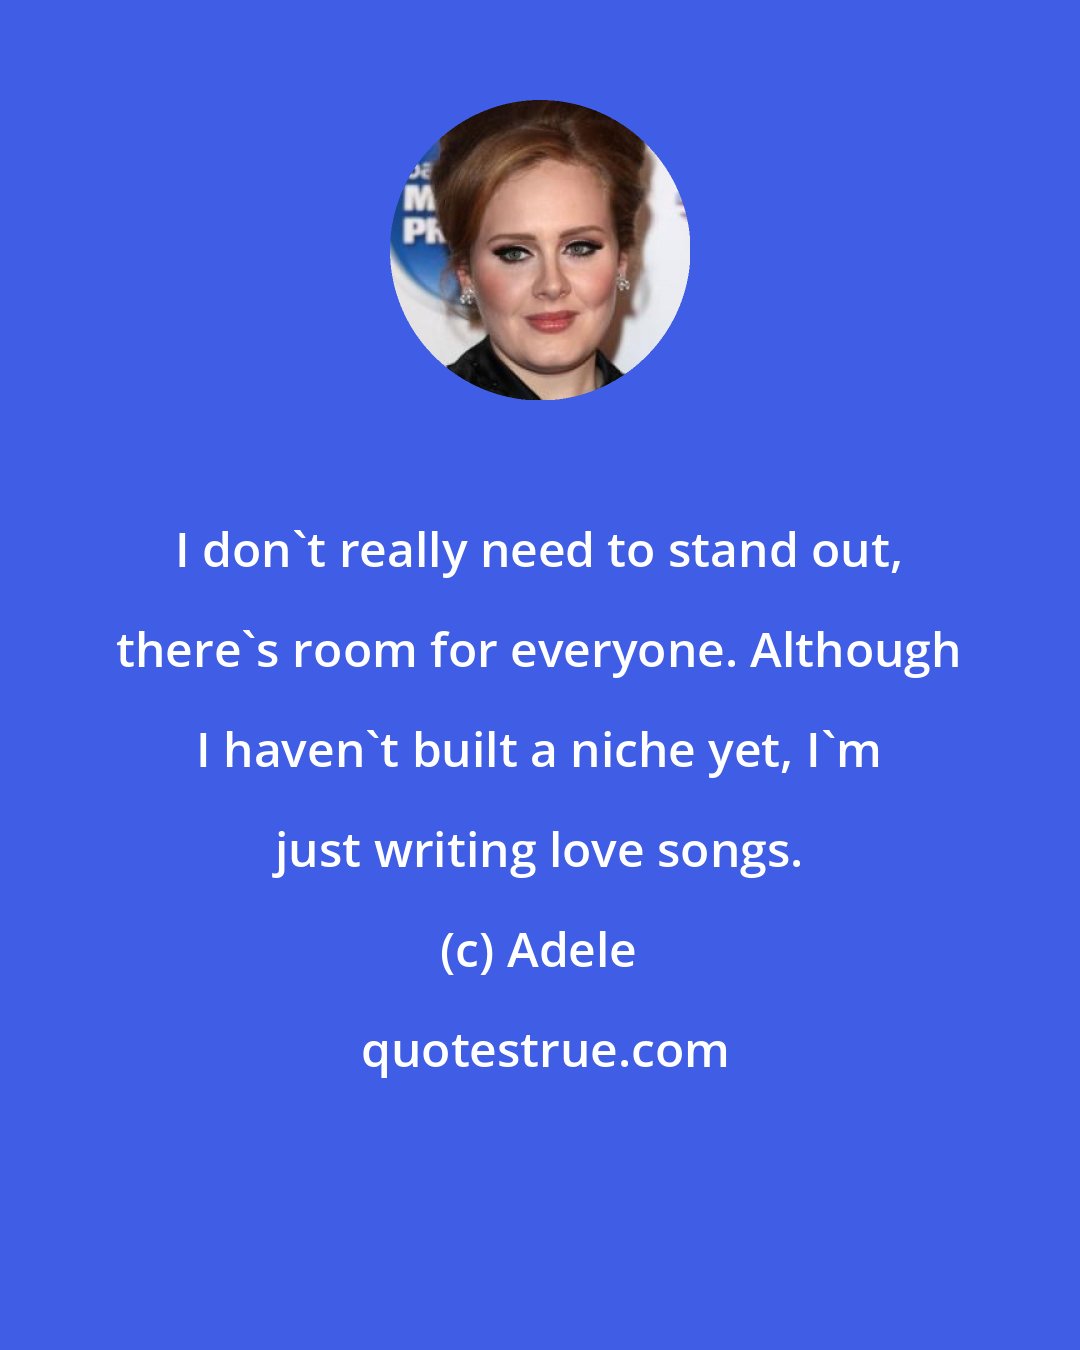 Adele: I don't really need to stand out, there's room for everyone. Although I haven't built a niche yet, I'm just writing love songs.